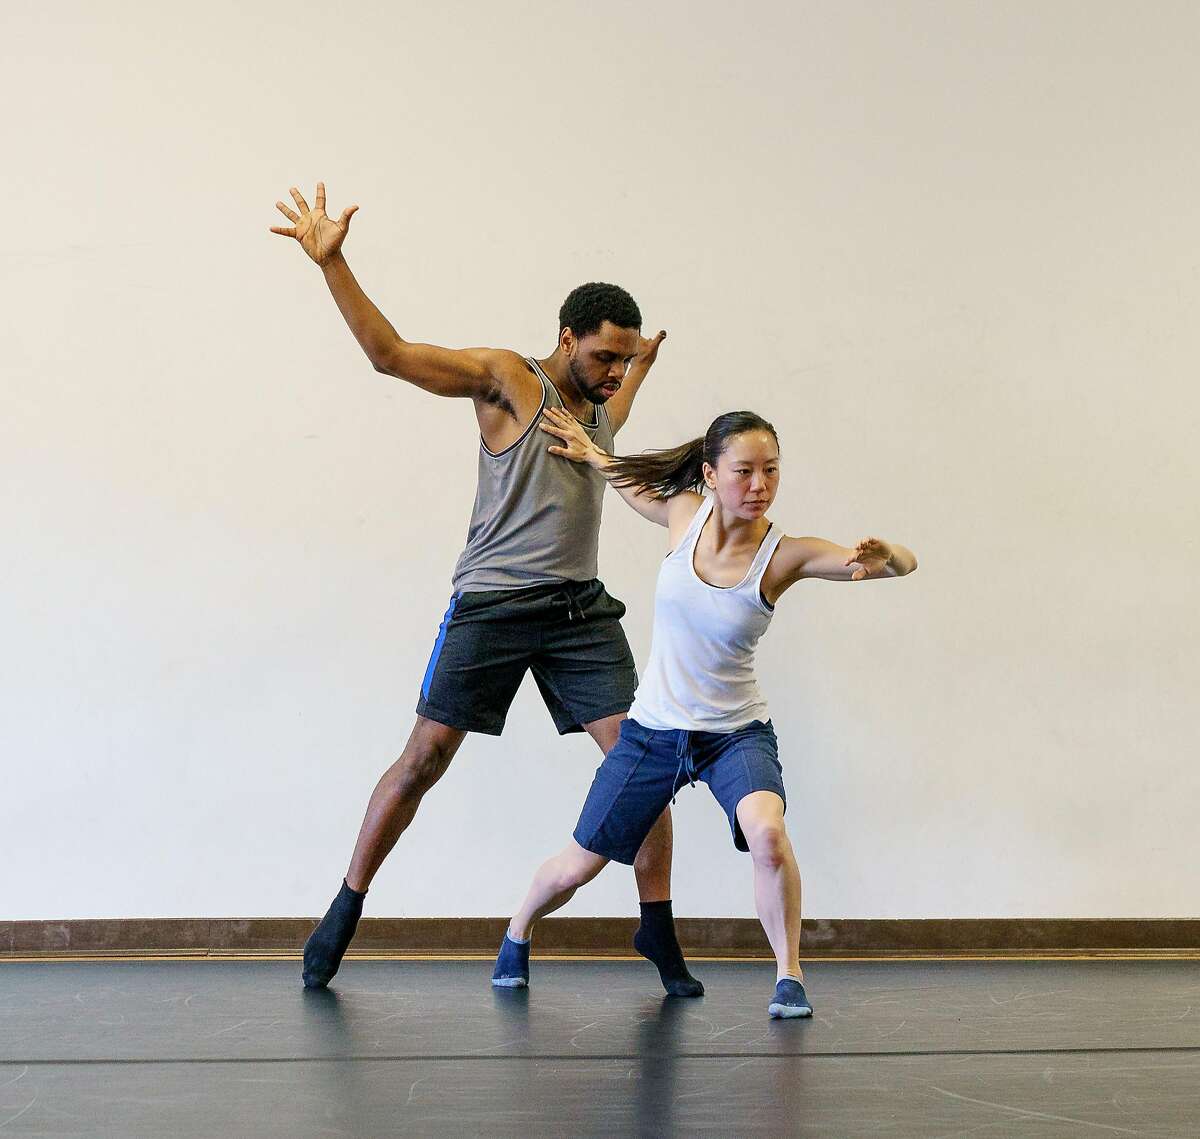 Dazaun Soleyn and Norma Fong of Robert Moses' Kin in the premiere of Moses "Triick Bags" at Dance Mission, San Francisco. The concert runs through Sunday, May 21. Photo by Steve Disenhof